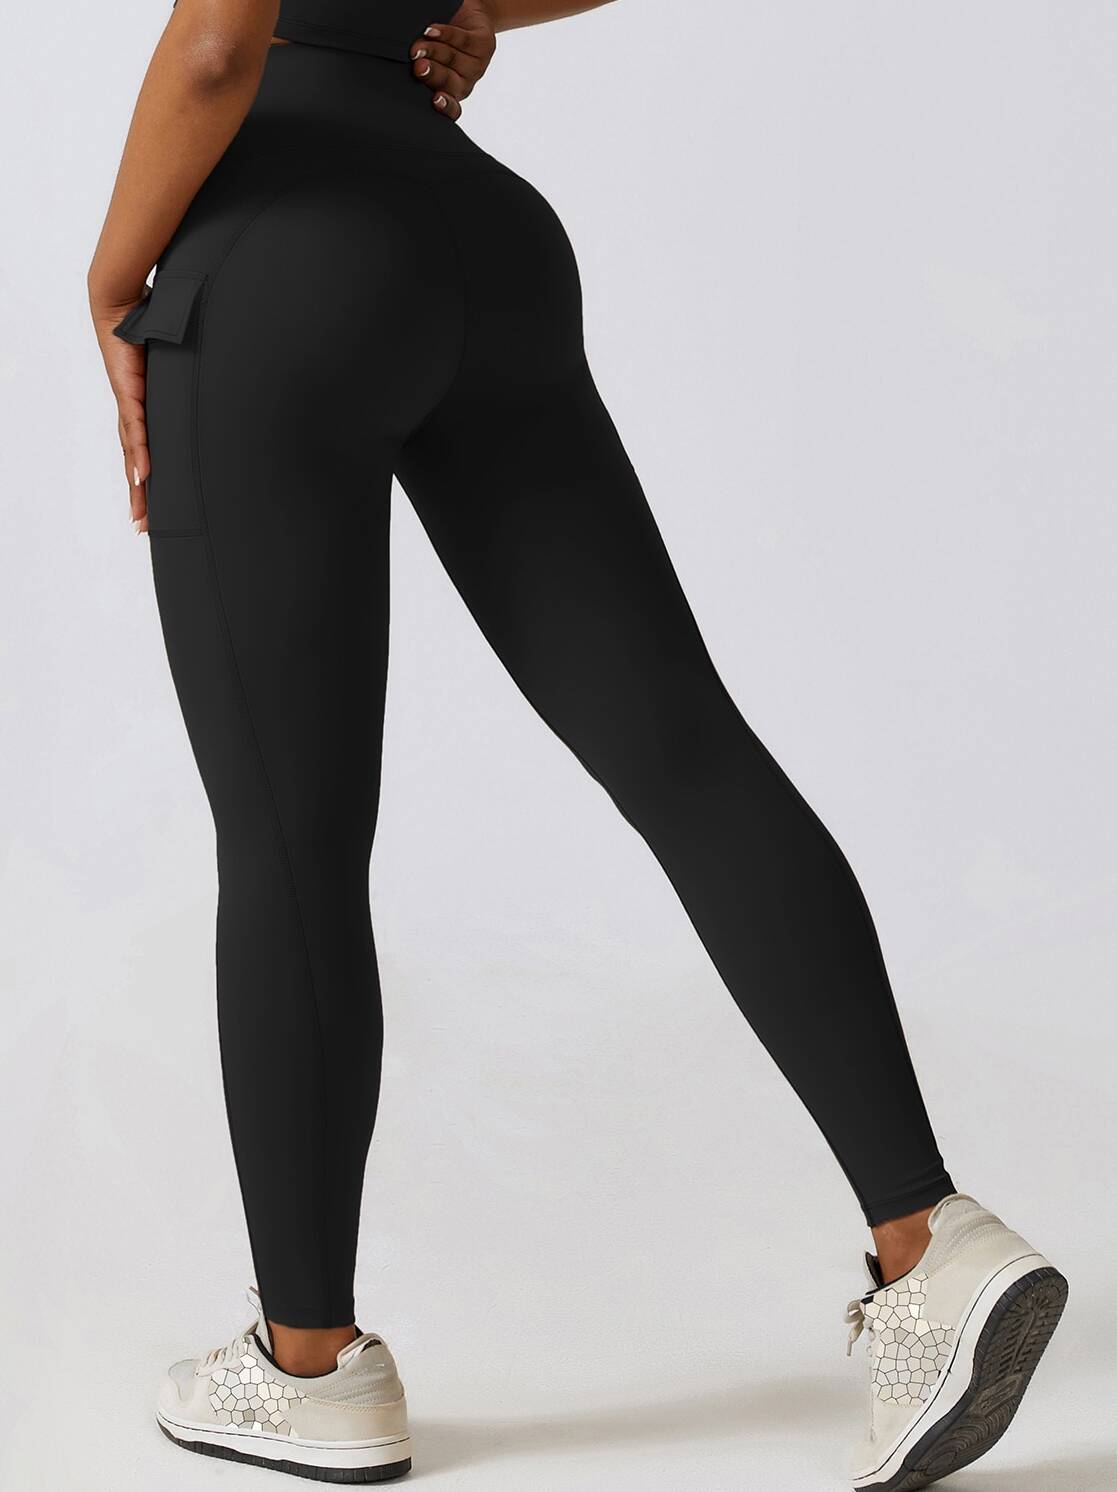 High Waisted Leggings-Yoga-Pants with Pockets for Women Tummy